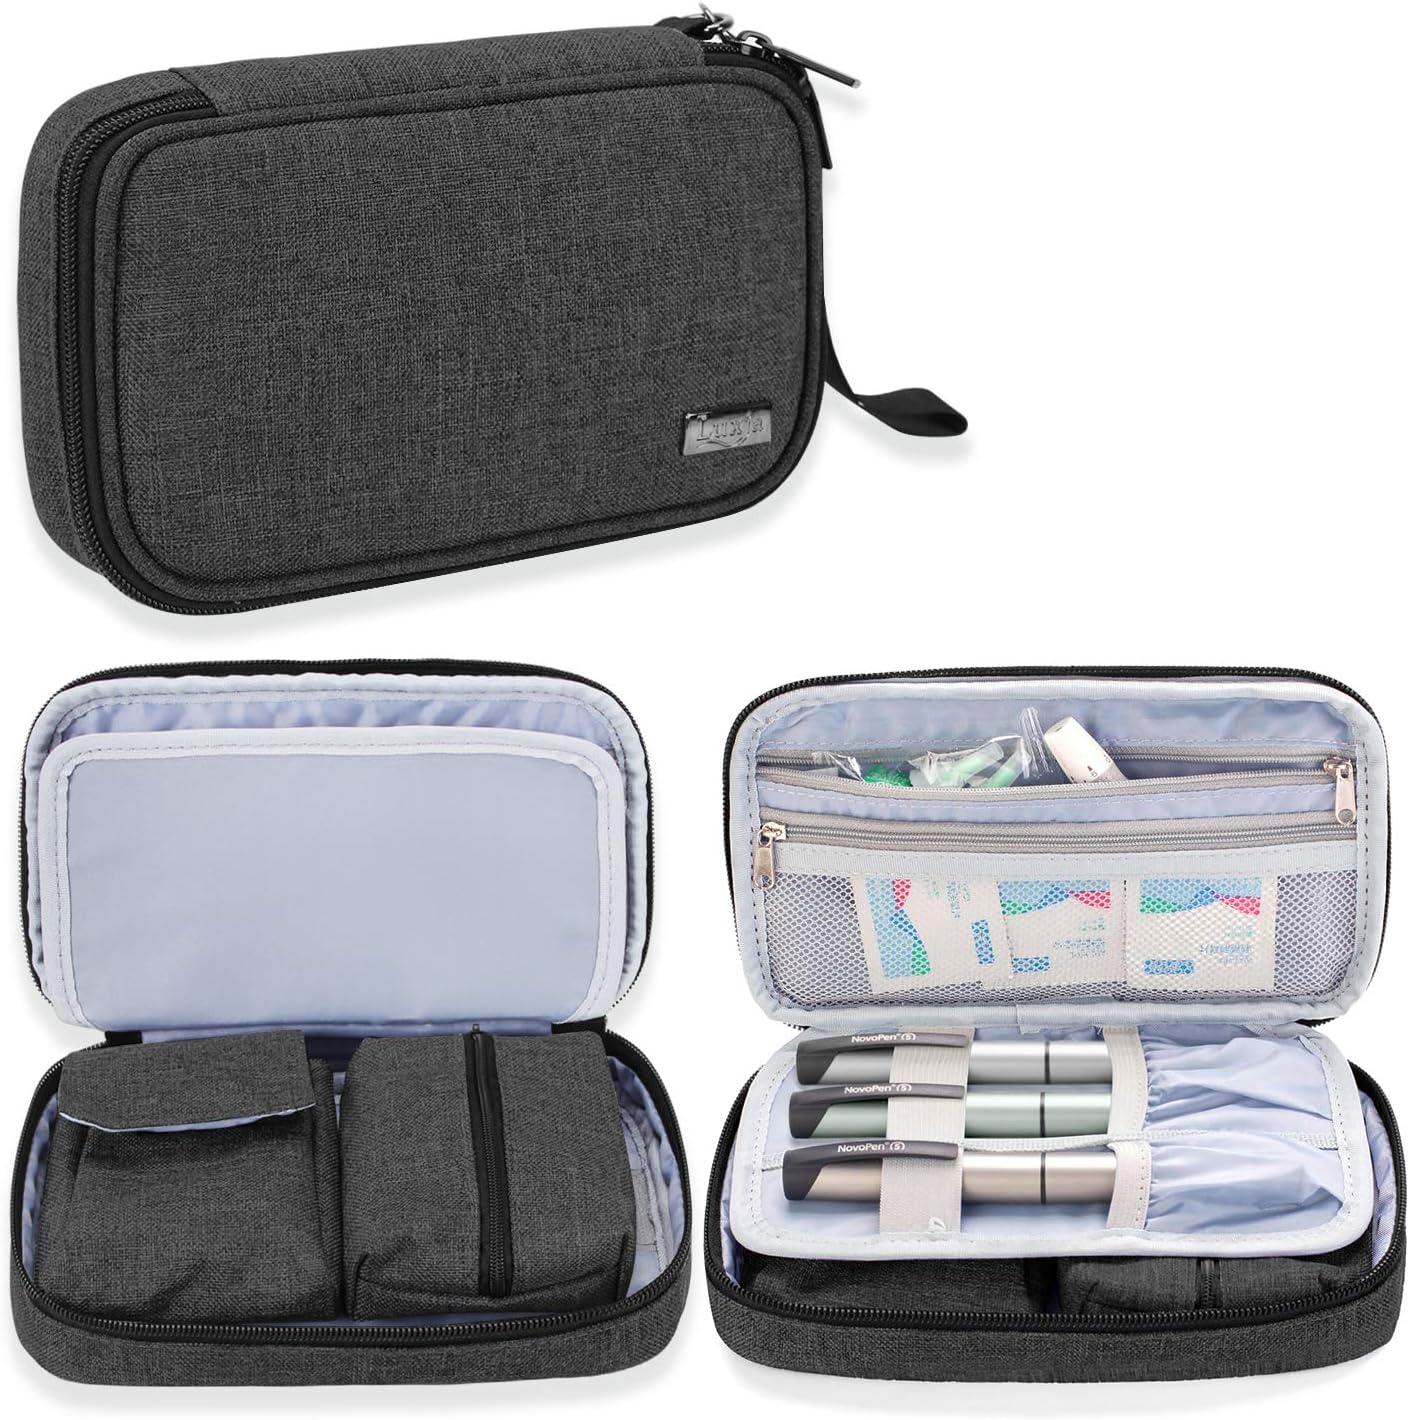 LUXJA Diabetic Supplies Travel Case, Storage Bag for Glucose Meter and Other Diabetic Supplies (Bag Only), Black